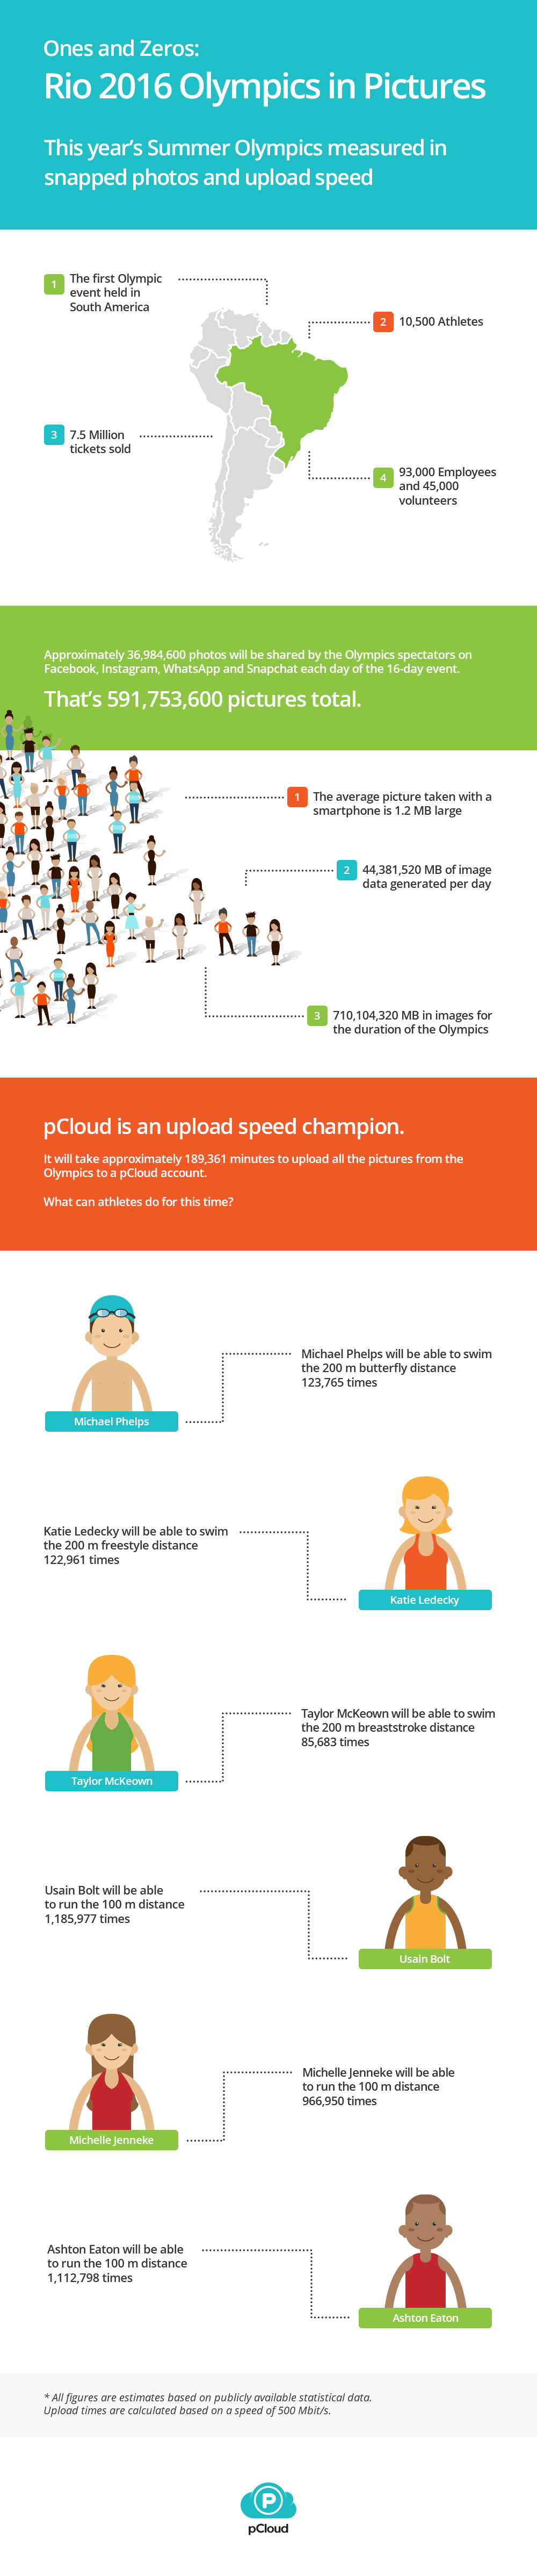 Rio 2016 Olympics in images and upload times | The pCloud Blog